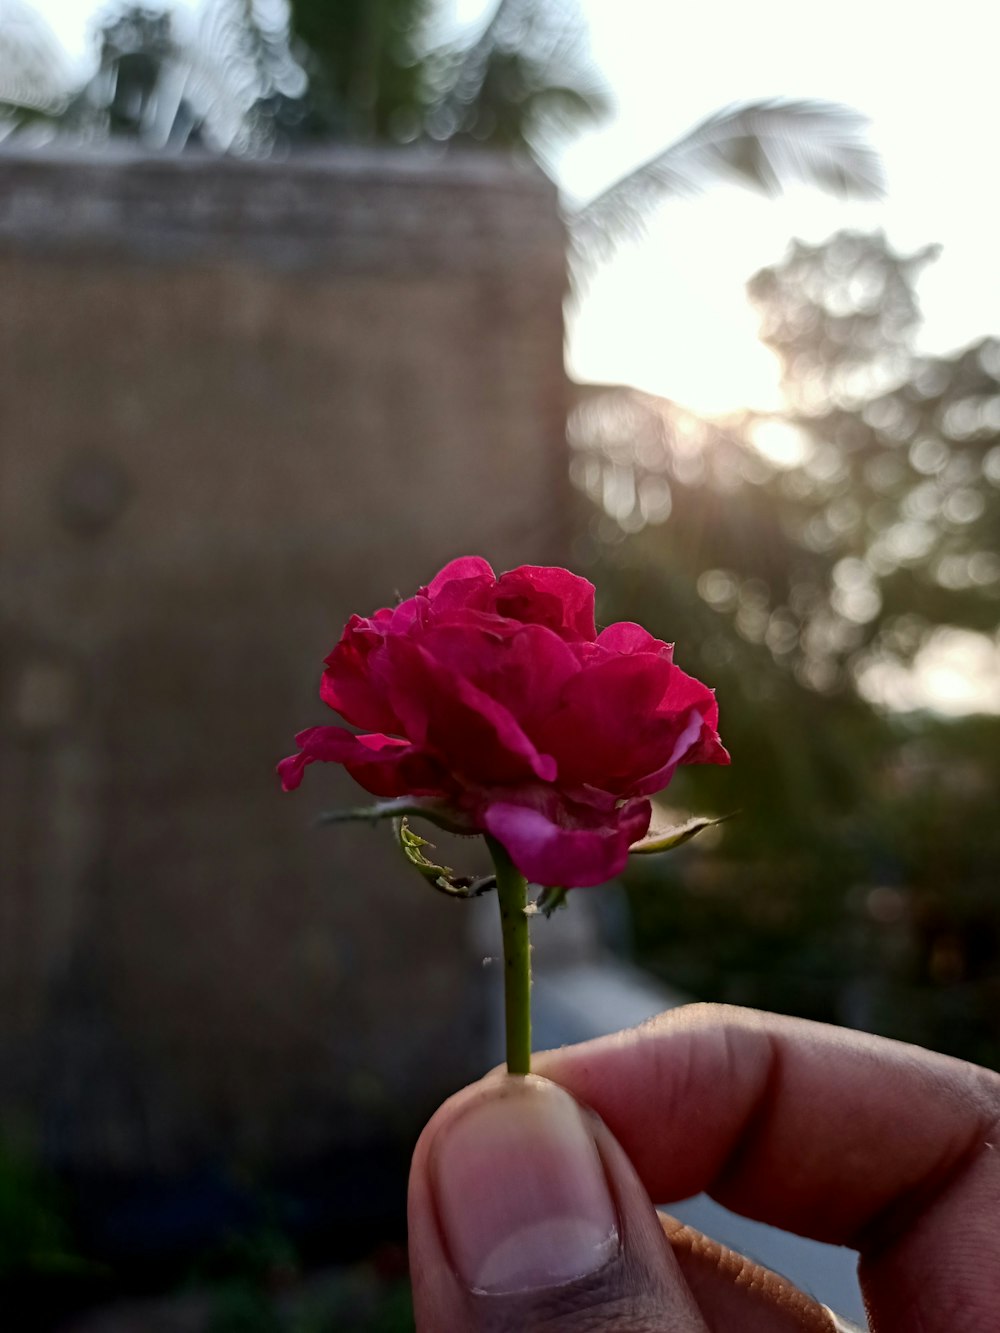 person holding pink rose in close up photography